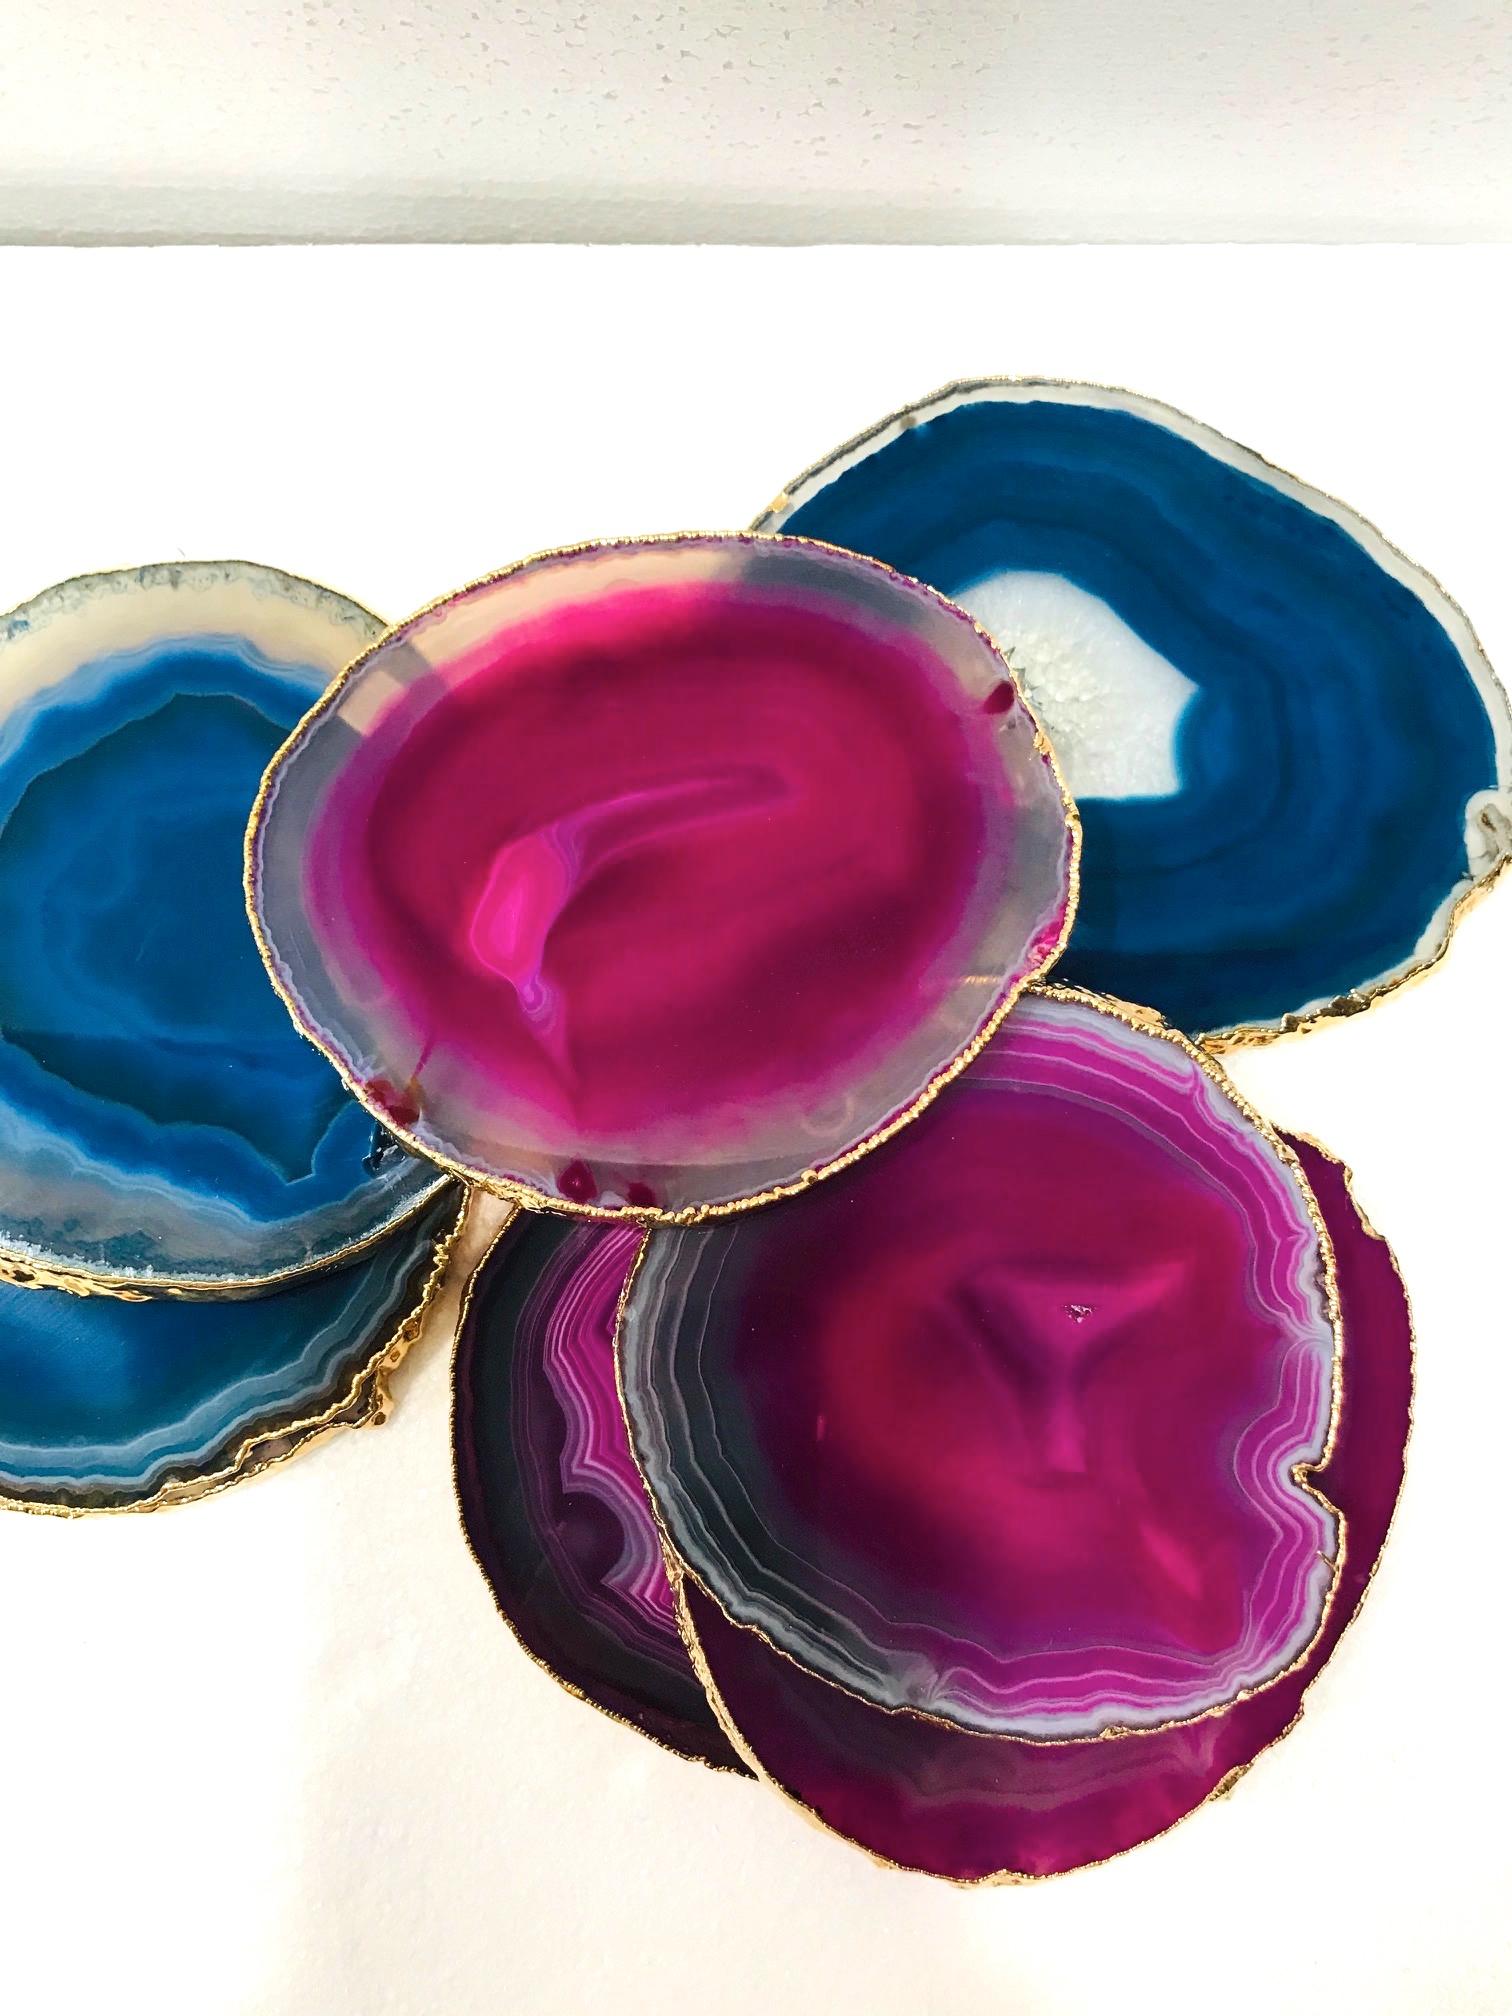 Set of eight organic modern agate and crystal coasters with 24-karat gold-plate finish. Set includes four fuchsia and four turquoise coasters with polished fronts and natural edges. Make beautiful and unique accessories to any coffee table or